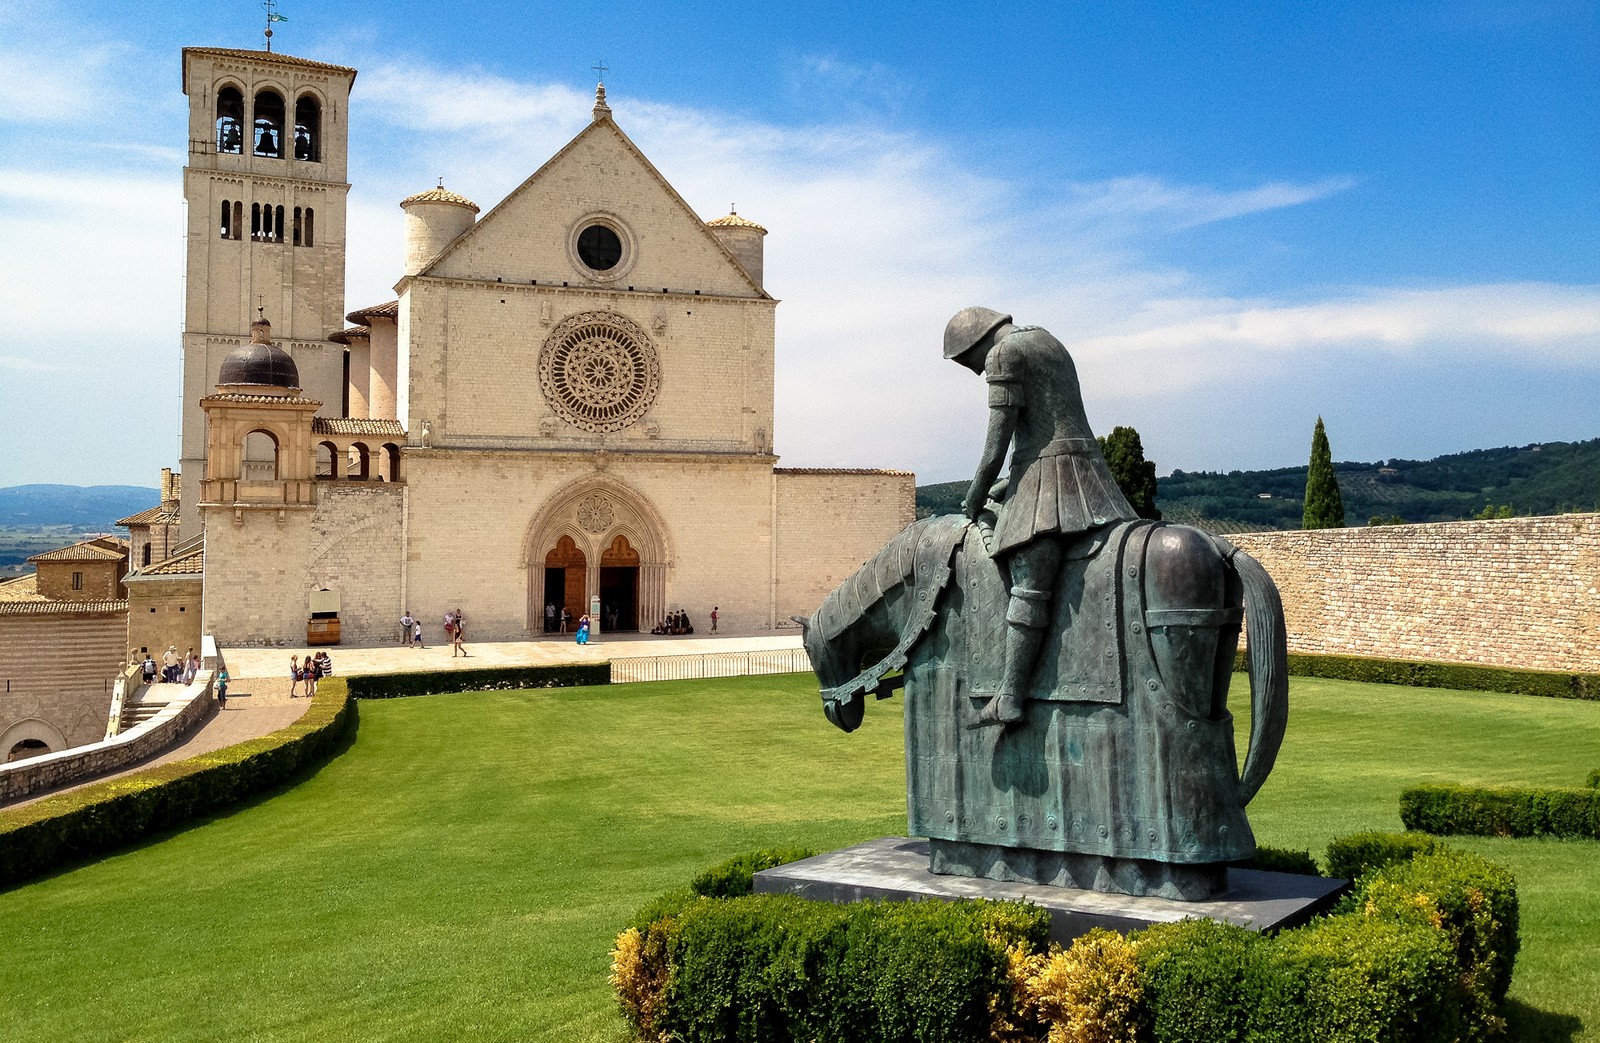 St. Francesco's Way: from Pietralunga to Assisi